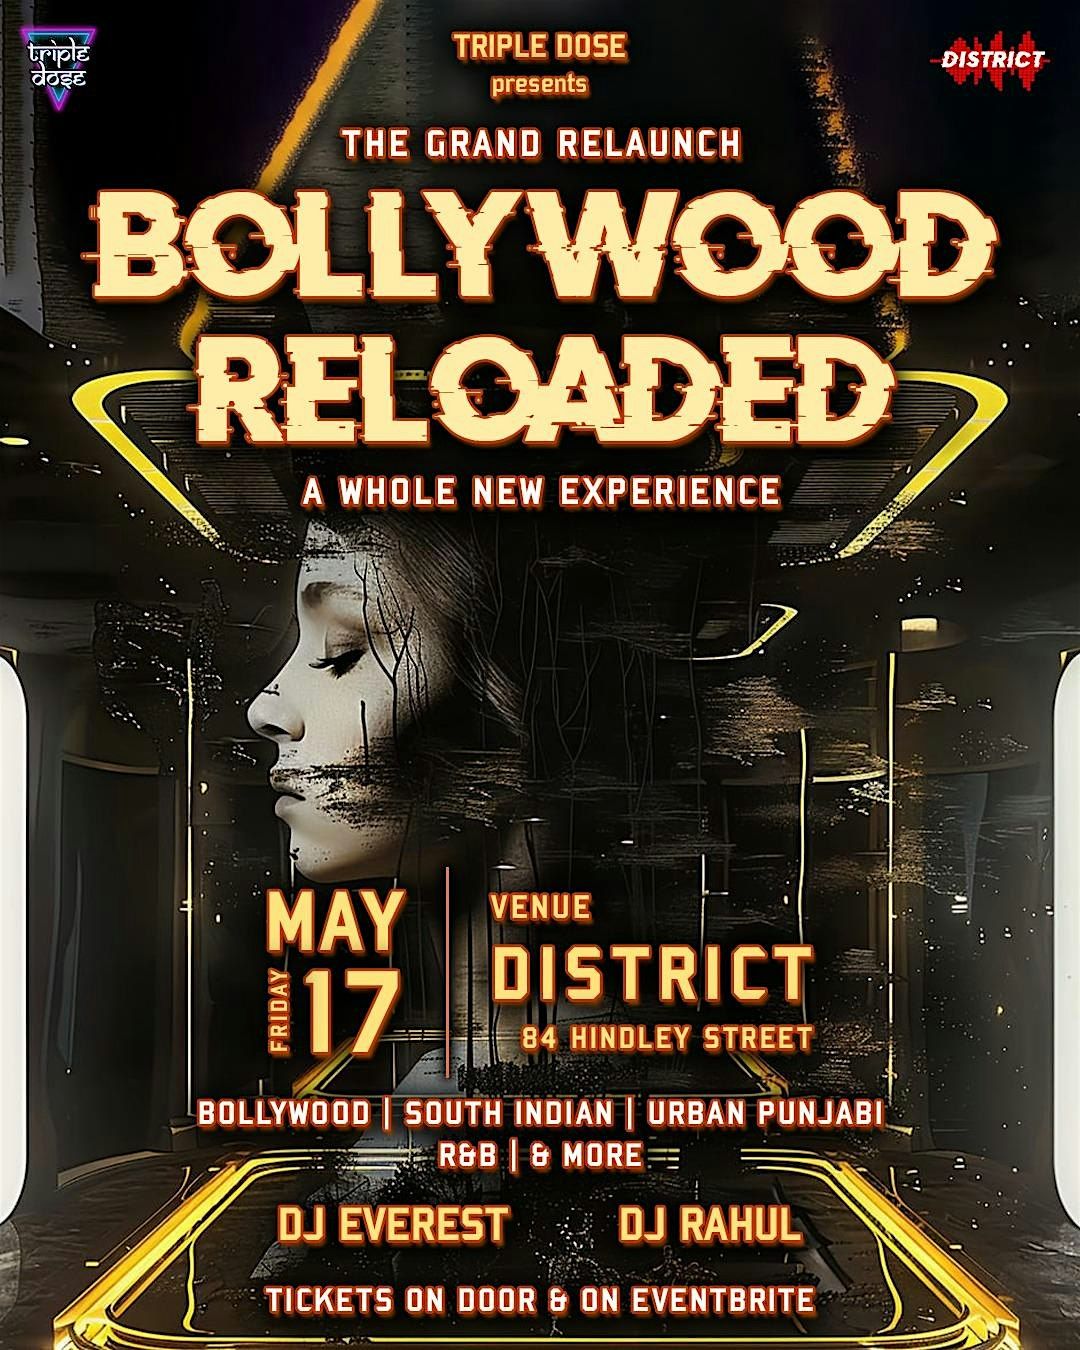 Bollywood Reloaded - Bigger, Better, and Blockbuster Experience